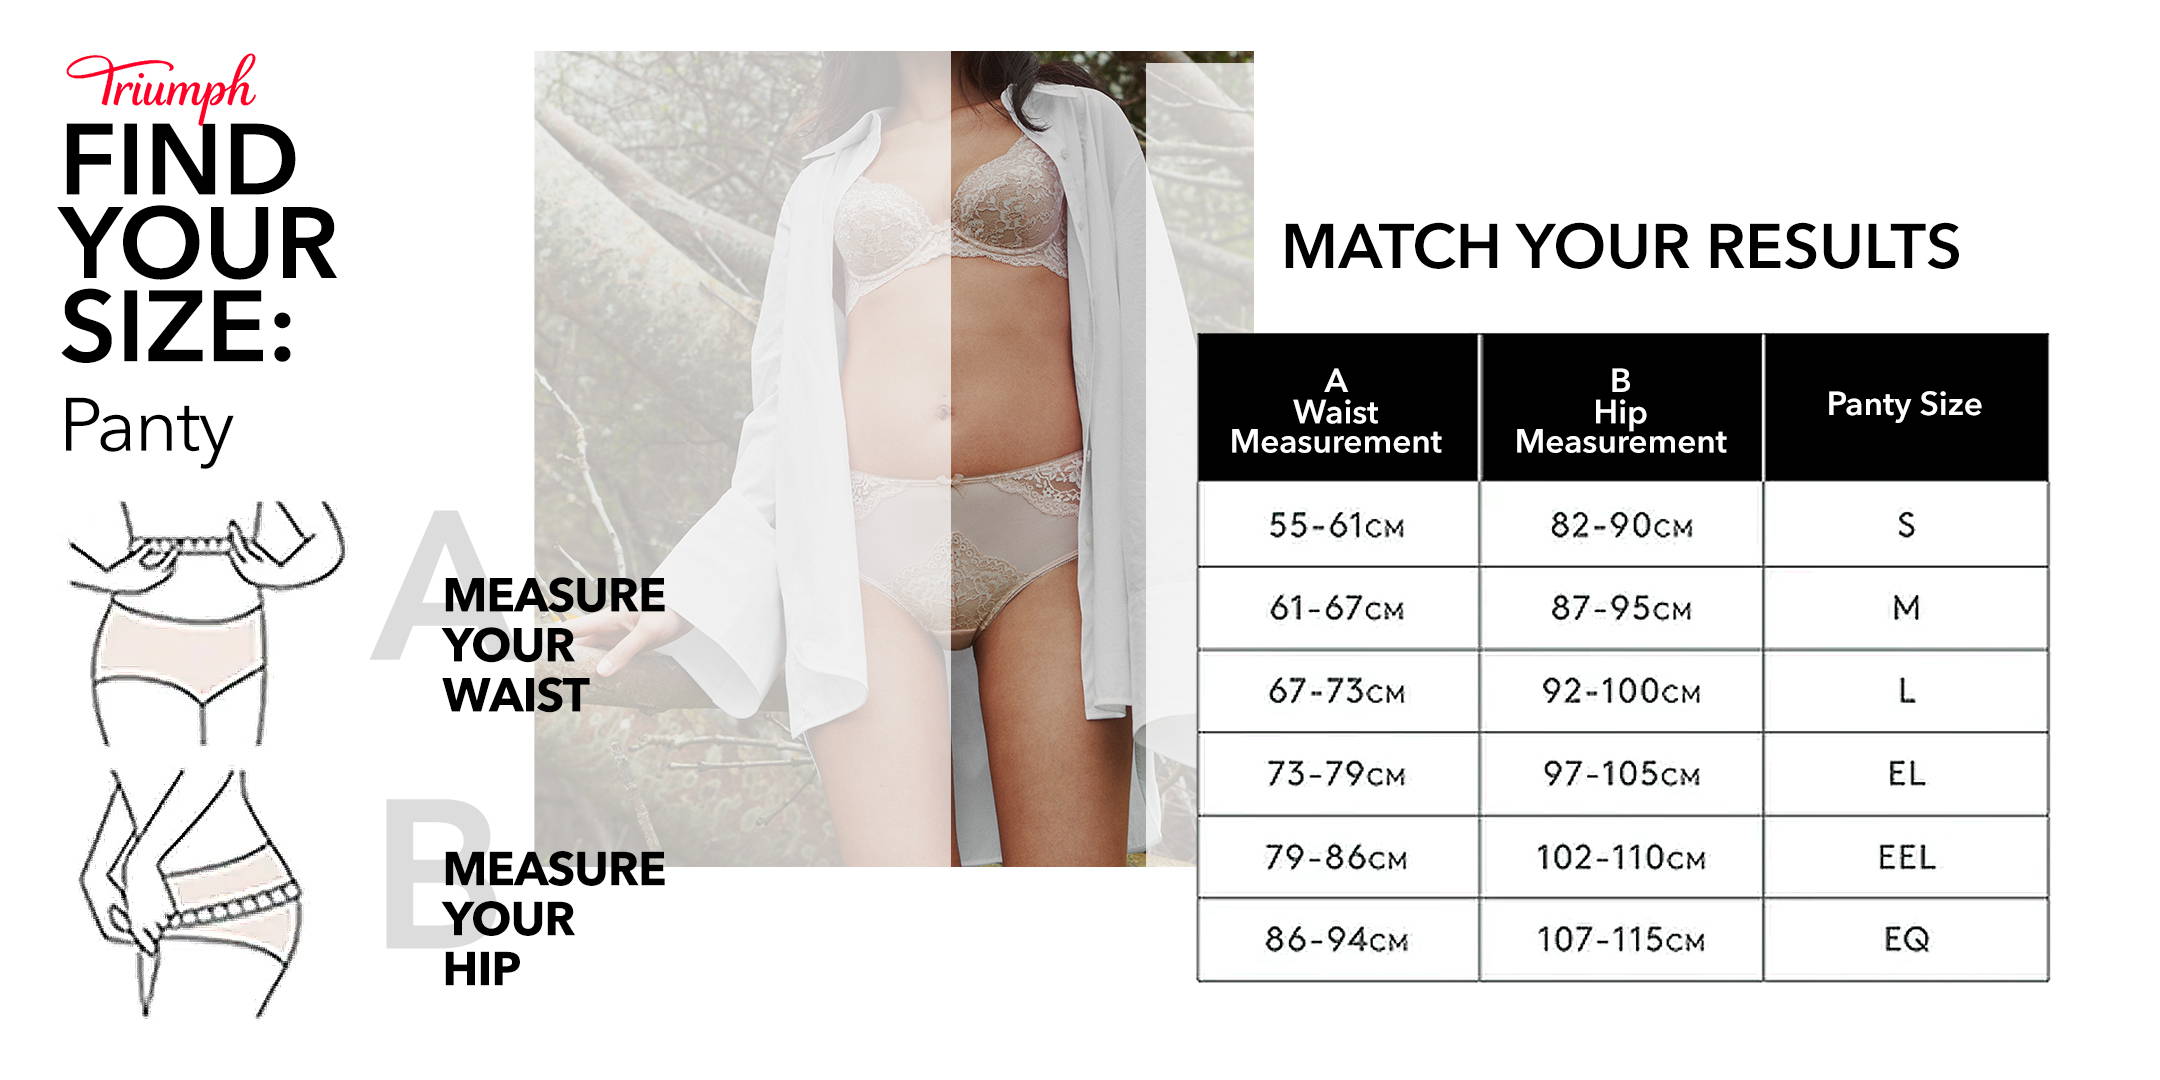 Fitted to Perfection: How to Measure for Intimates and Underwear—